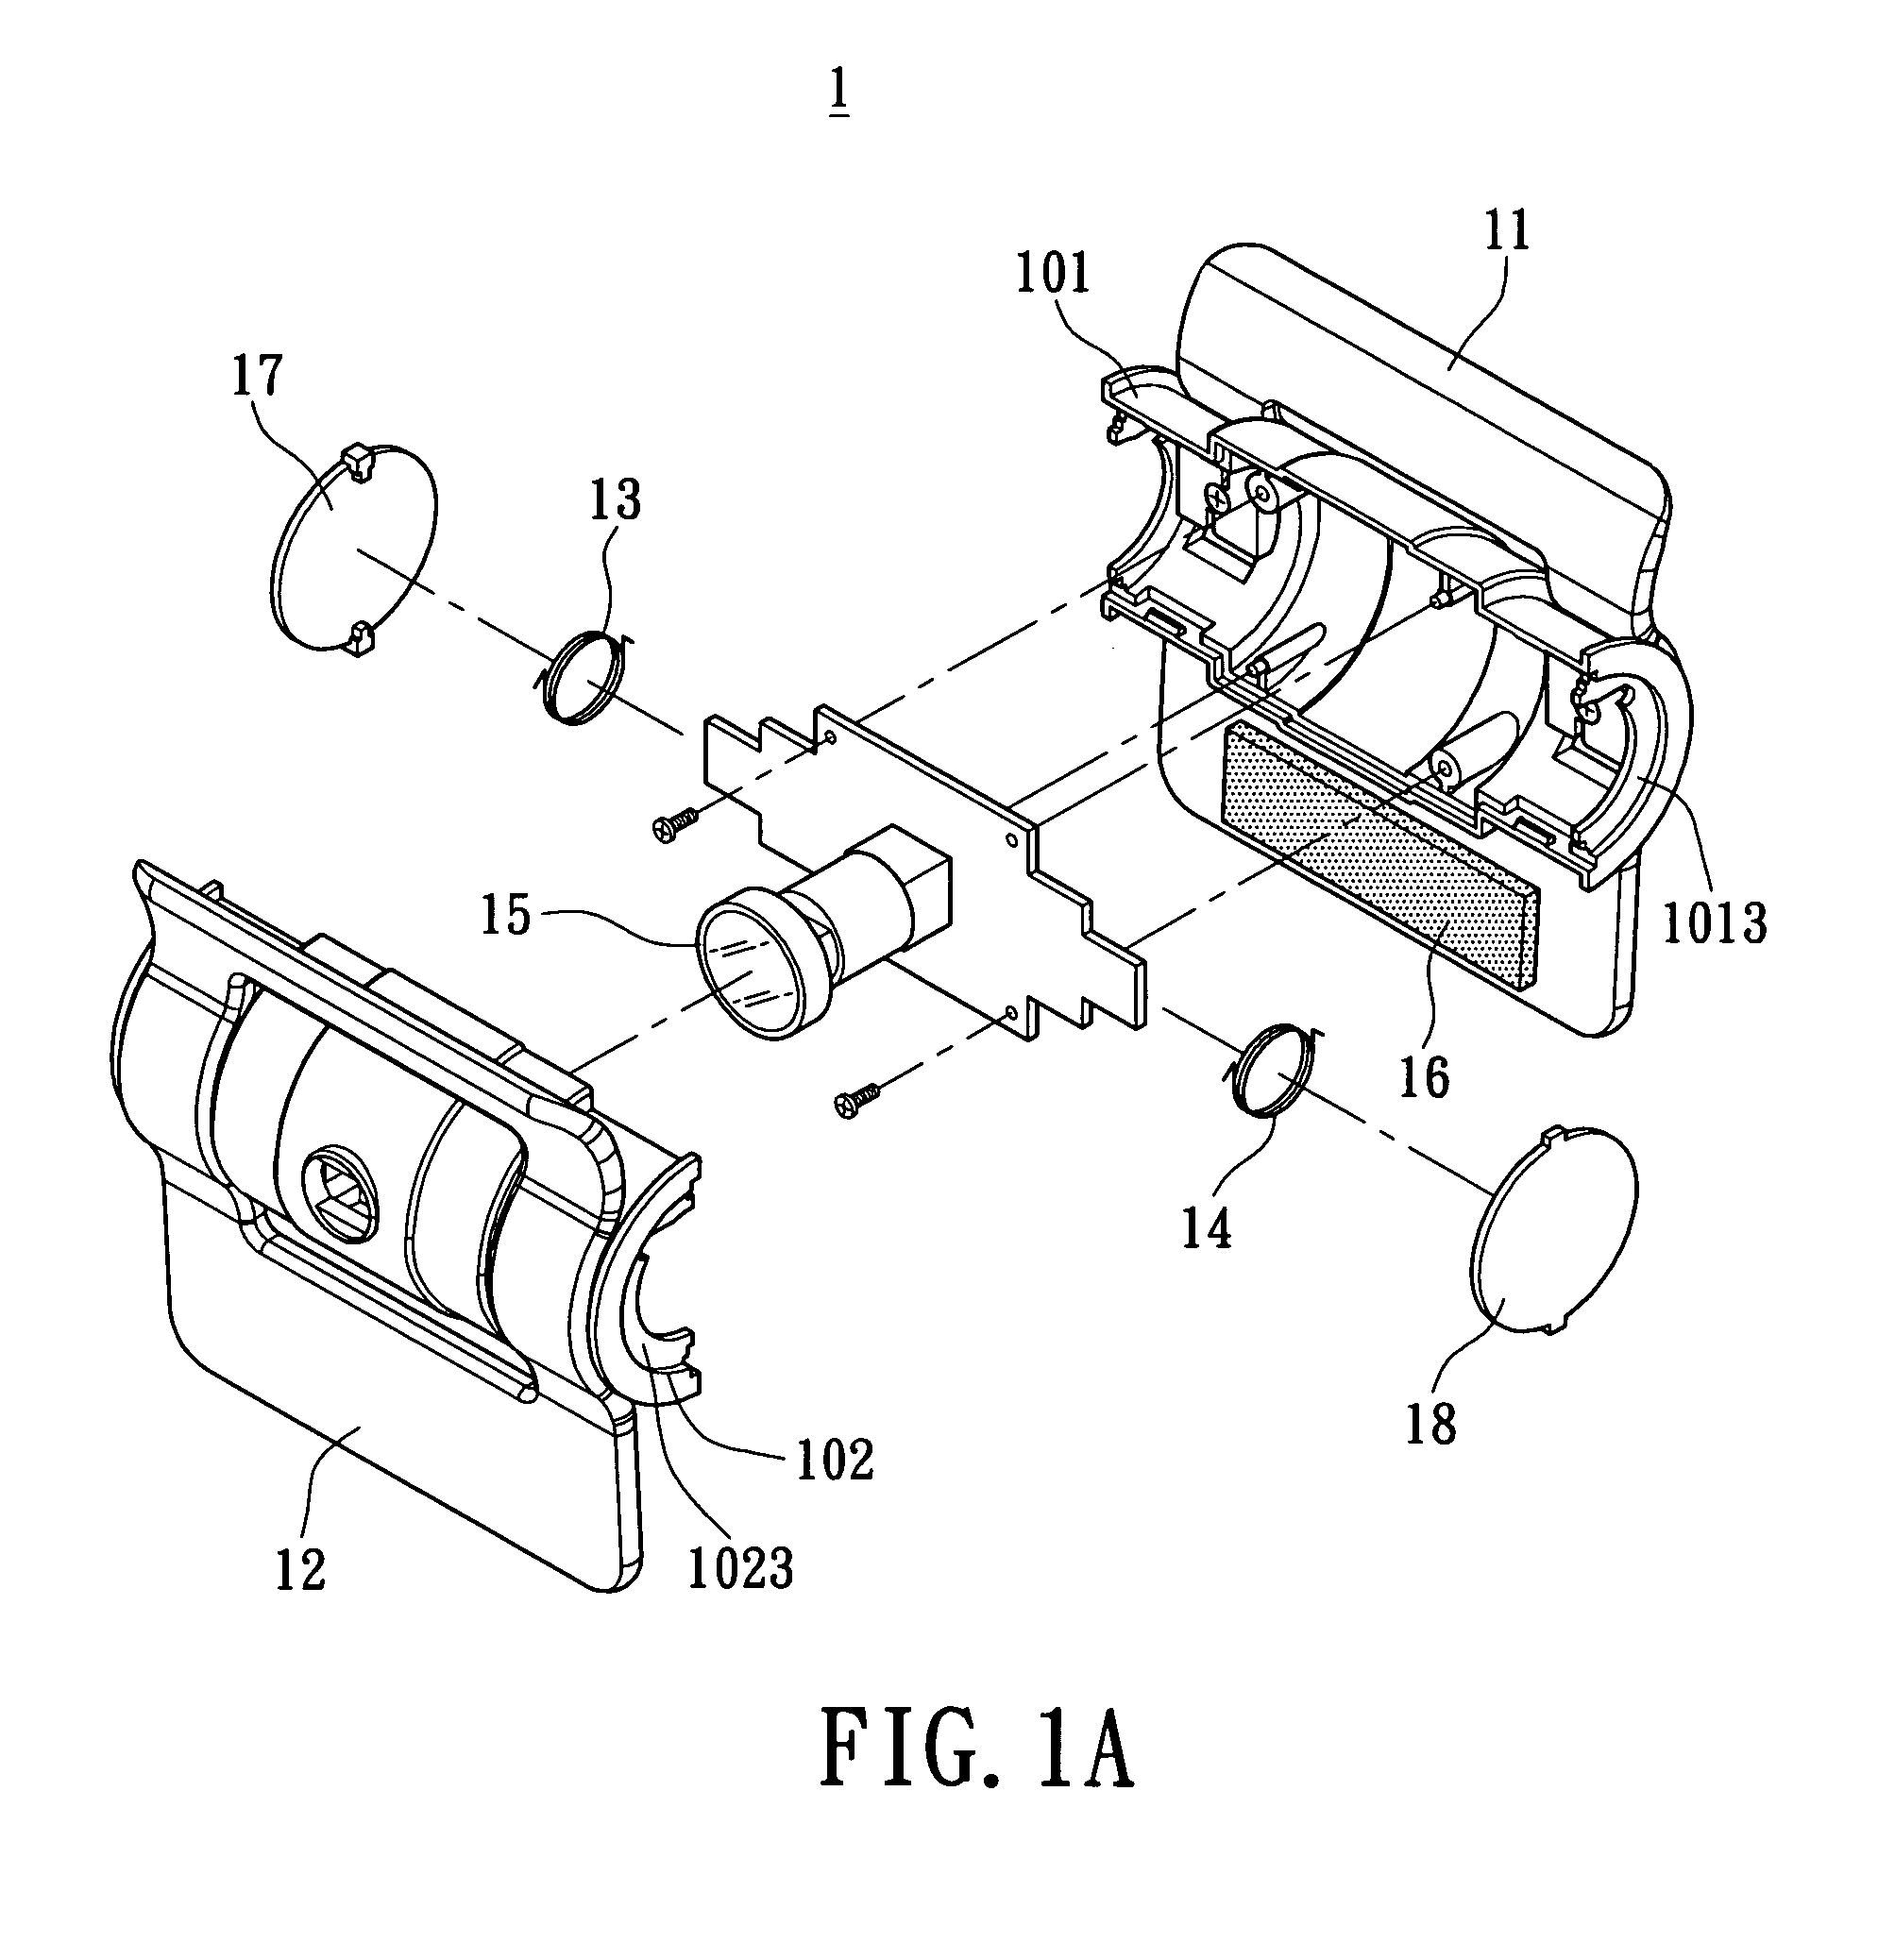 Webcam module having a clamping device